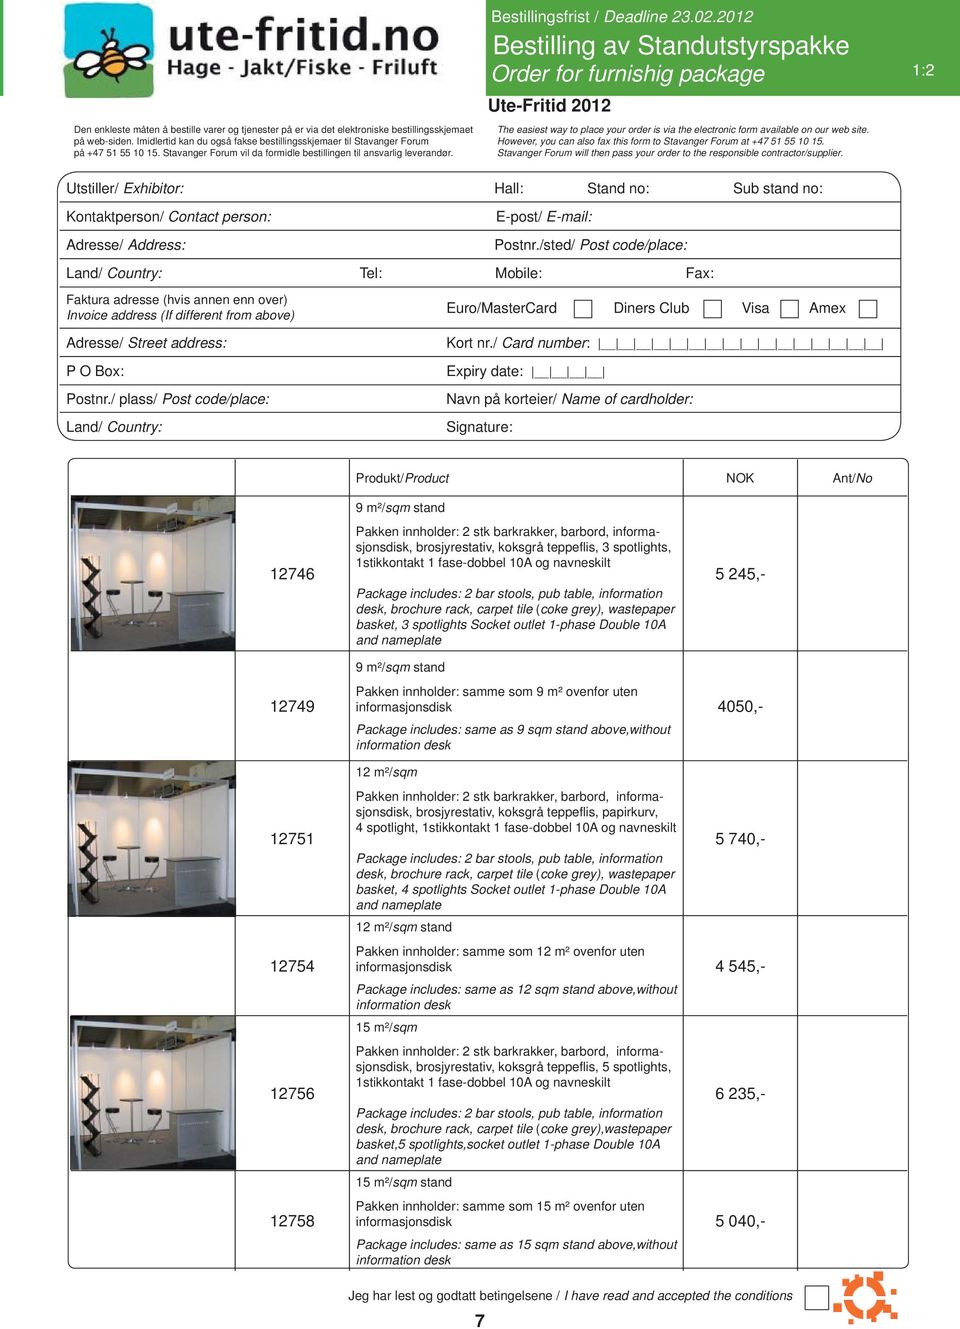 2012 Bestilling av Standutstyrspakke Order for furnishig package 1:2 The easiest way to place your order is via the electronic form available on our web site.